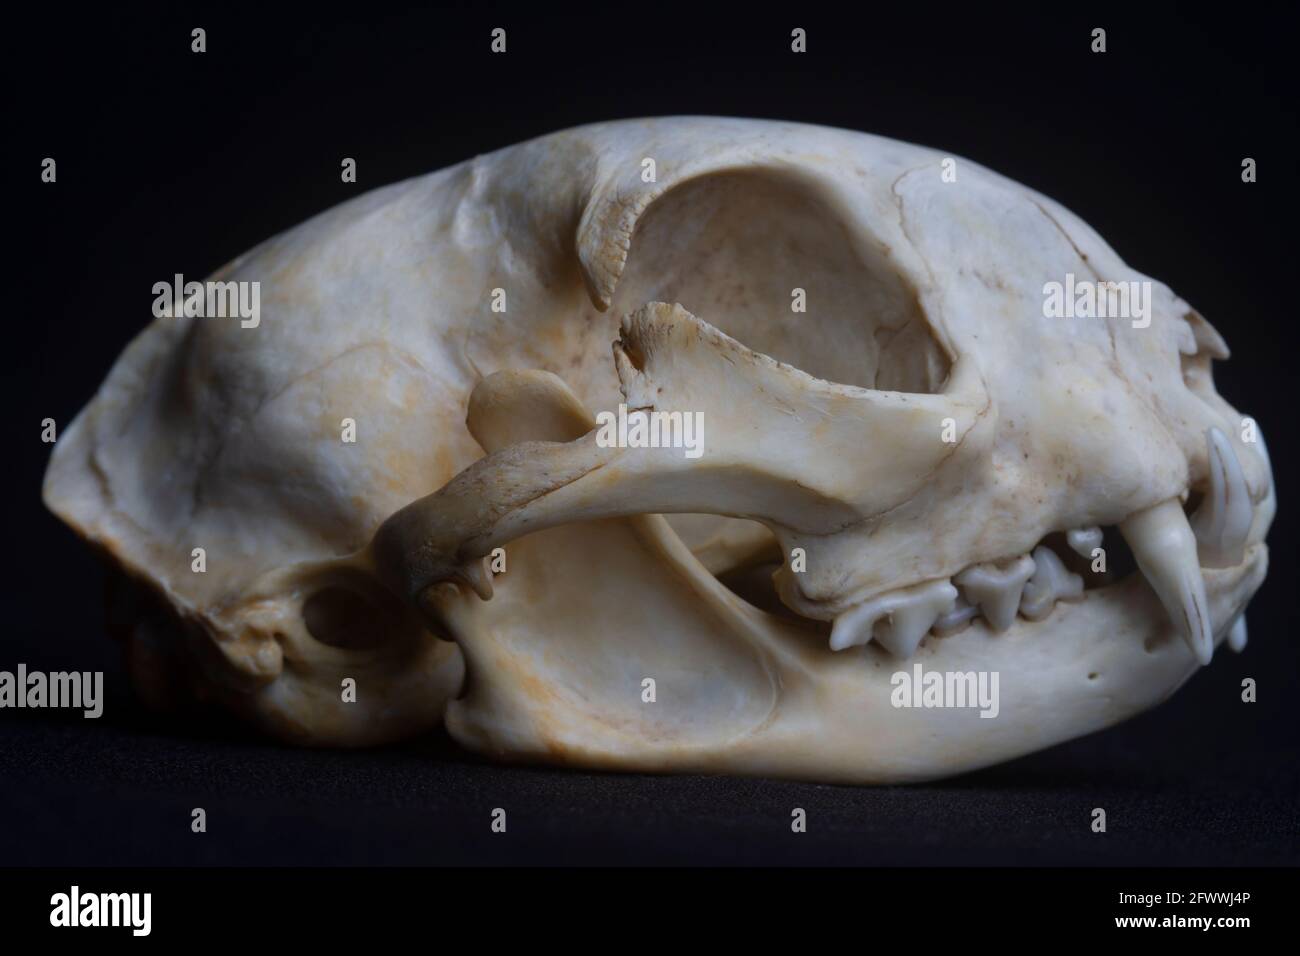 Cougar skull with black background Stock Photo